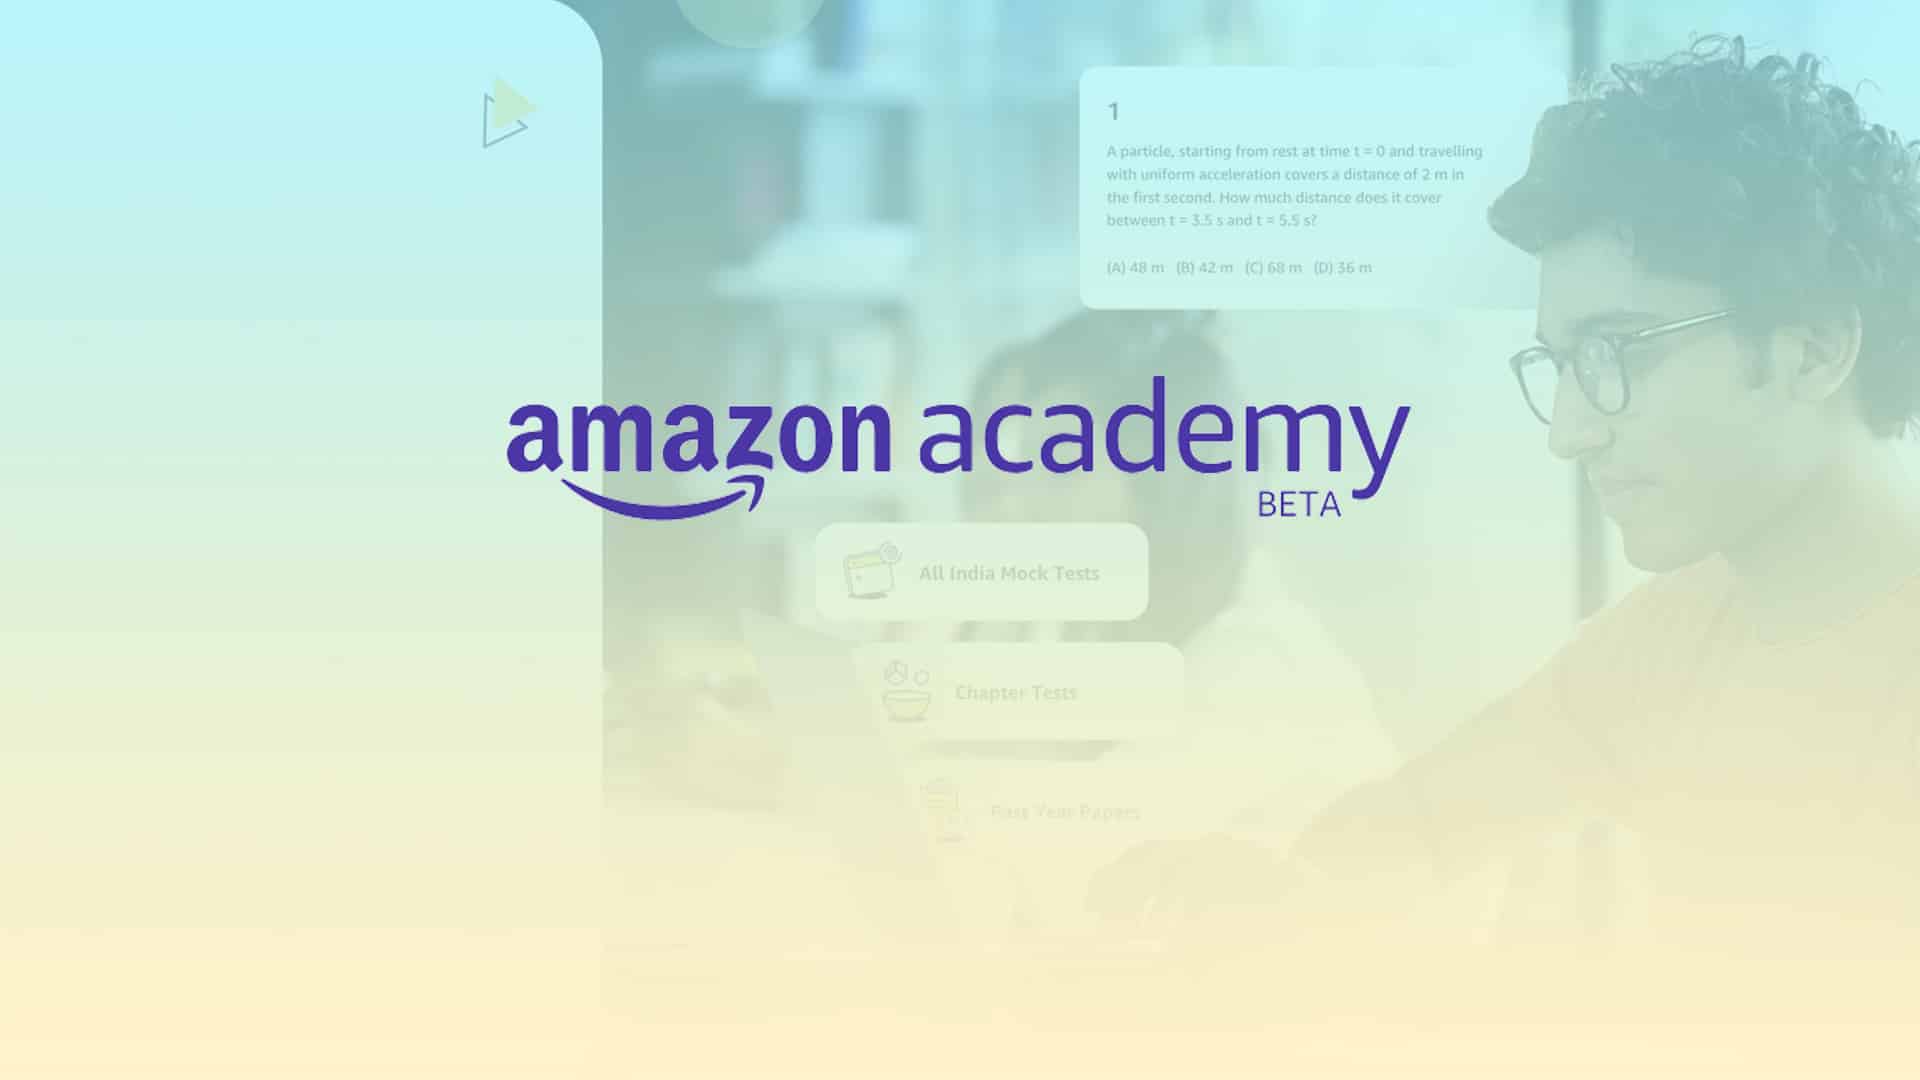 Amazon India launches academy to help students prepare for JEE